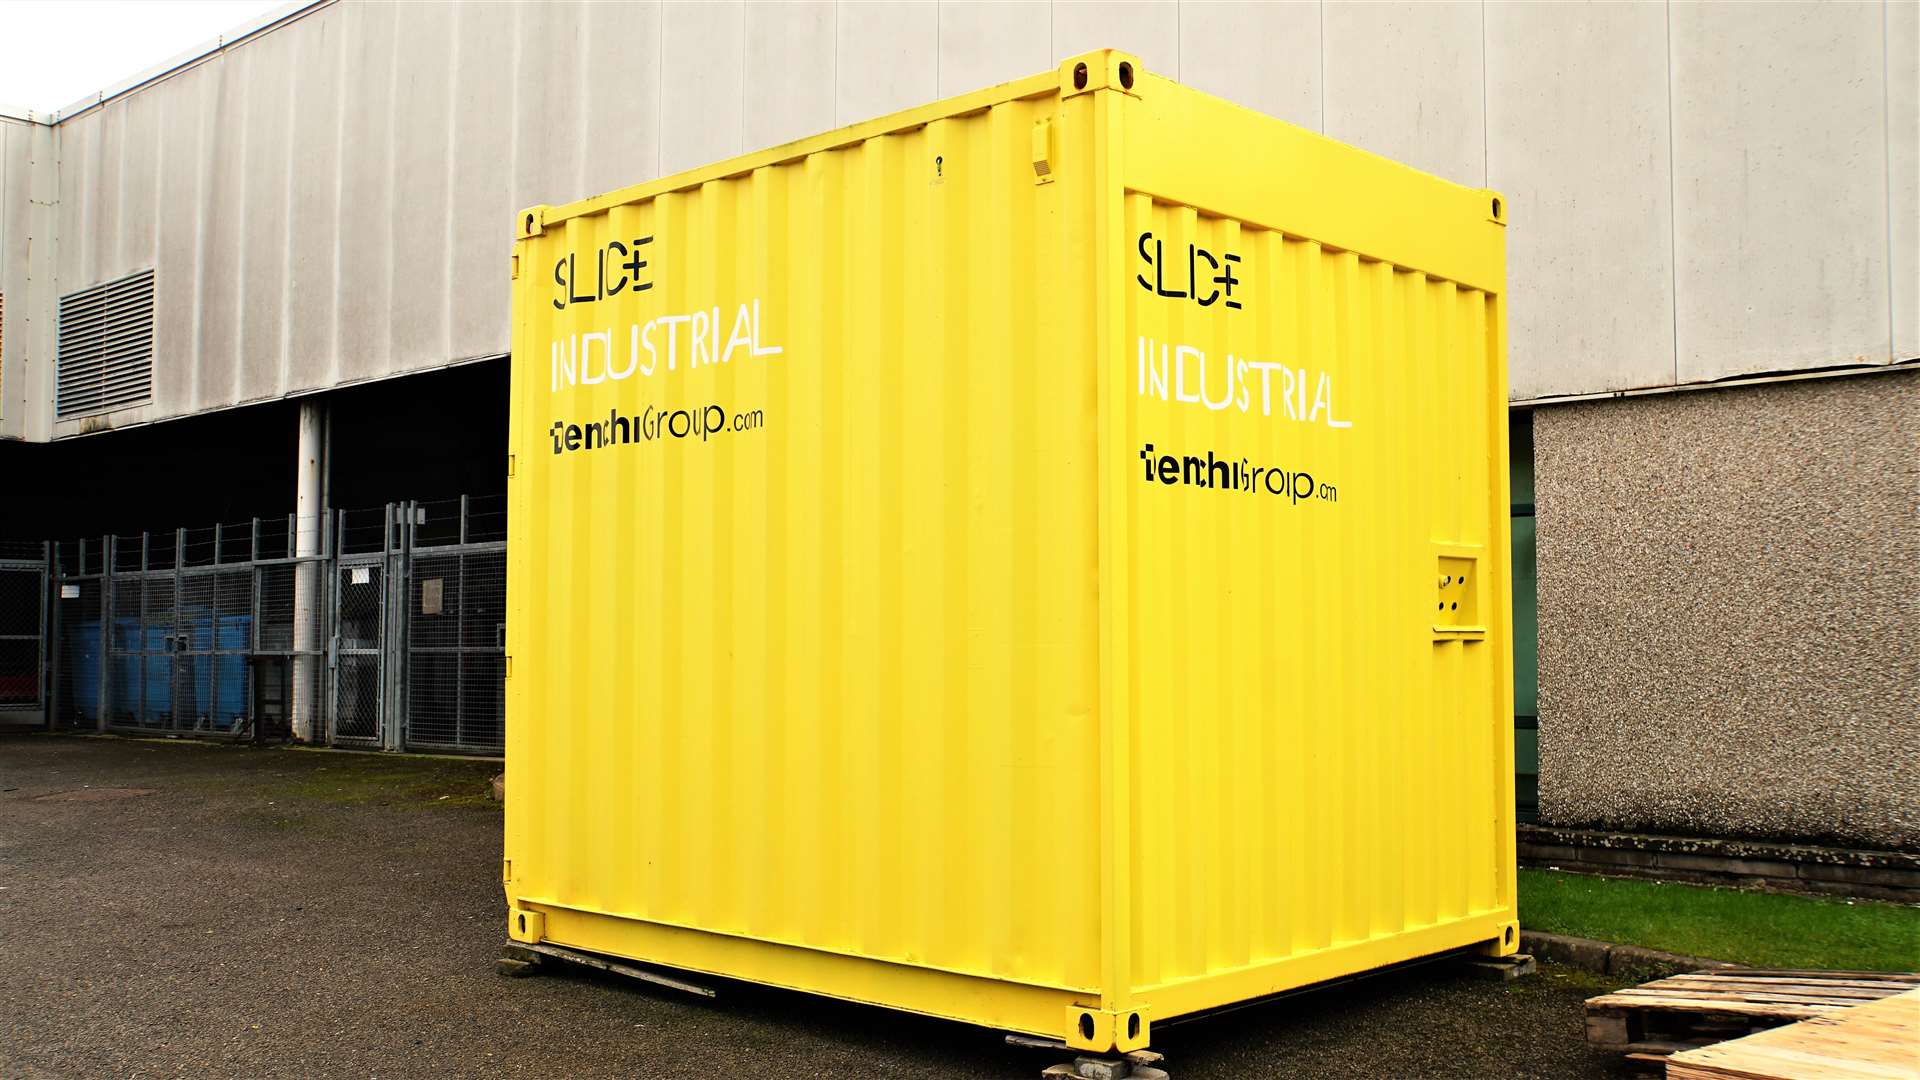 Denchi's huge industrial battery trademarked as SLICE. Picture: DGS